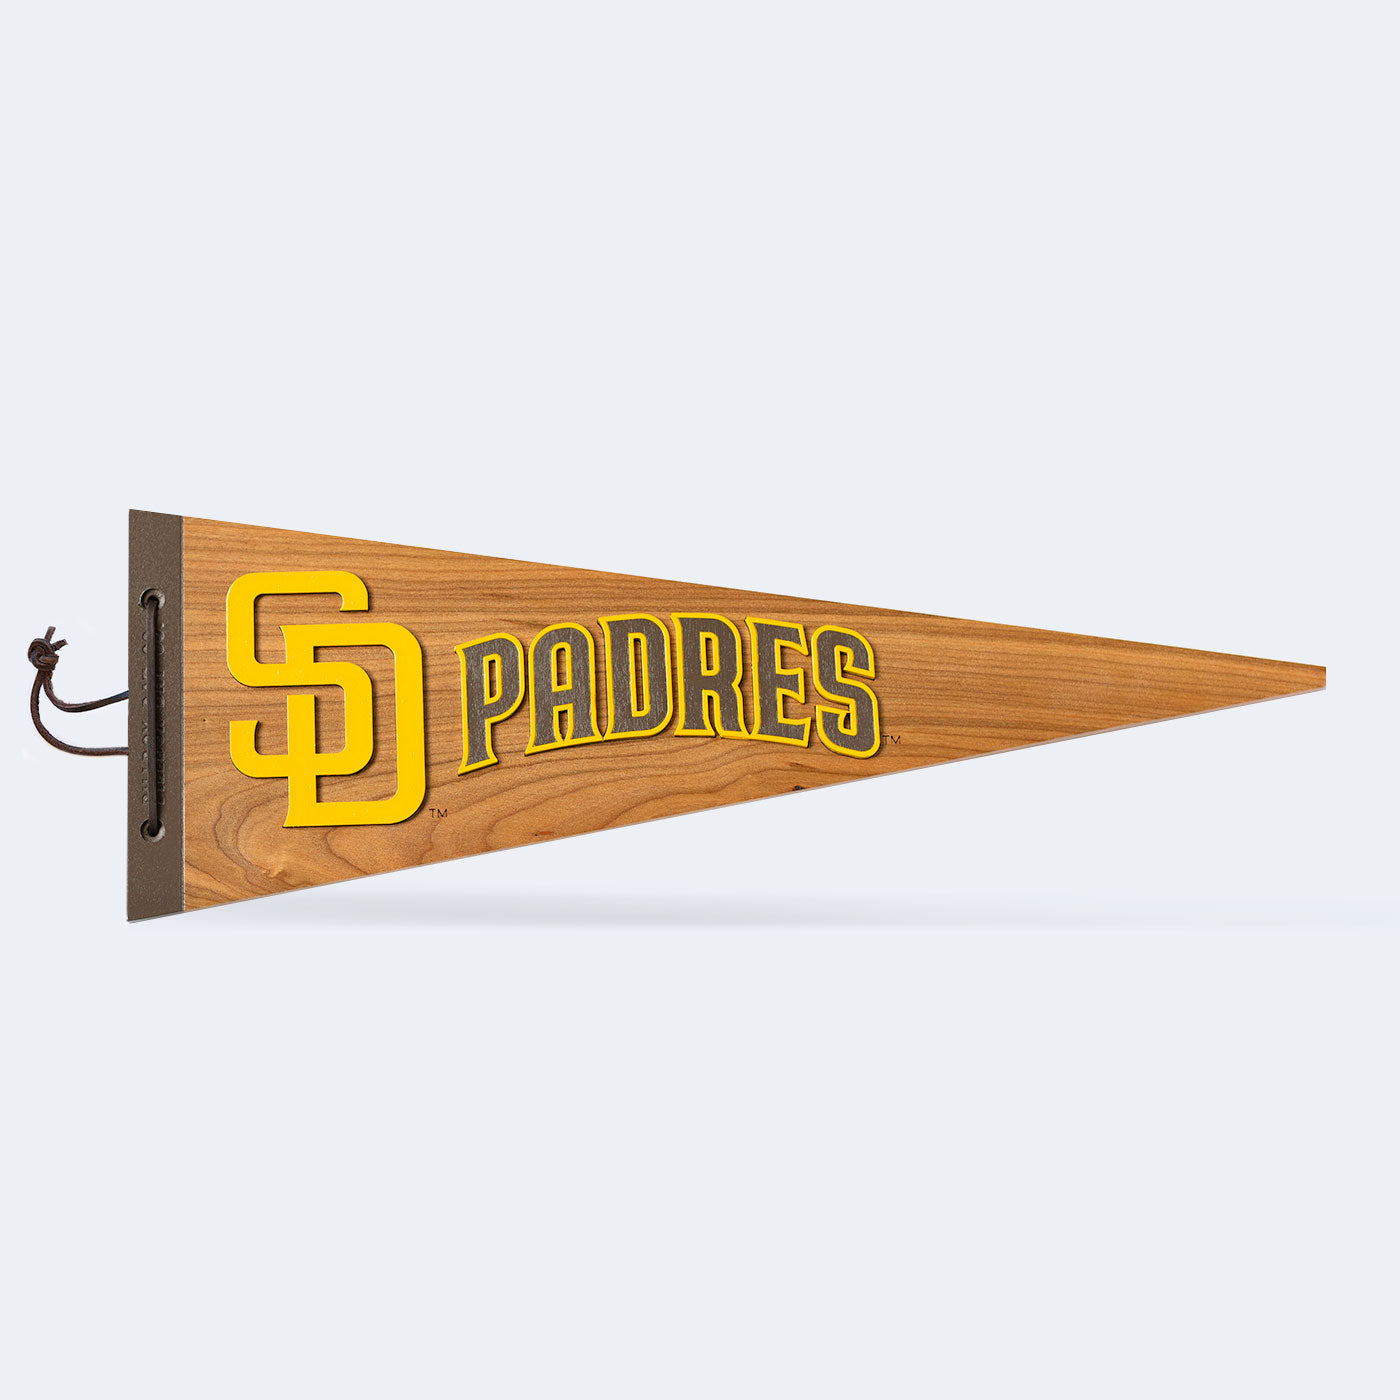 City Connect San Diego Padres Wall Art